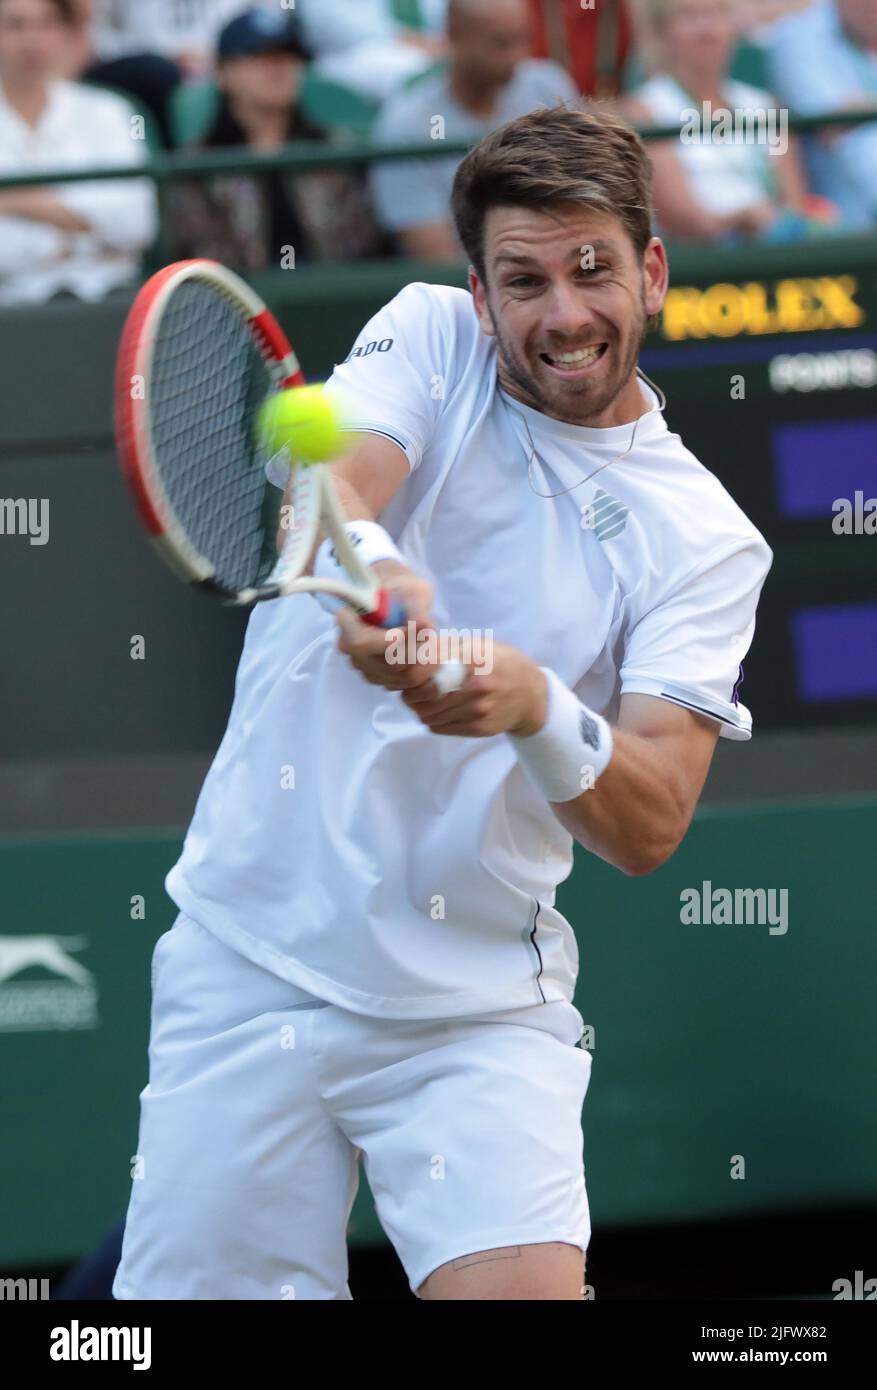 London, UK. 05th July, 2022. Great Britain's Cameron Norrie in action during his Quarter-Final match against Belgian David Goffin on day nine of the 2022 Wimbledon championships in London onTuesday, July 05, 2022. Norrie won the match 3-6, 7-5, 2-6, 6-3, 7-5. Photo by Hugo Philpott/UPI Credit: UPI/Alamy Live News Stock Photo